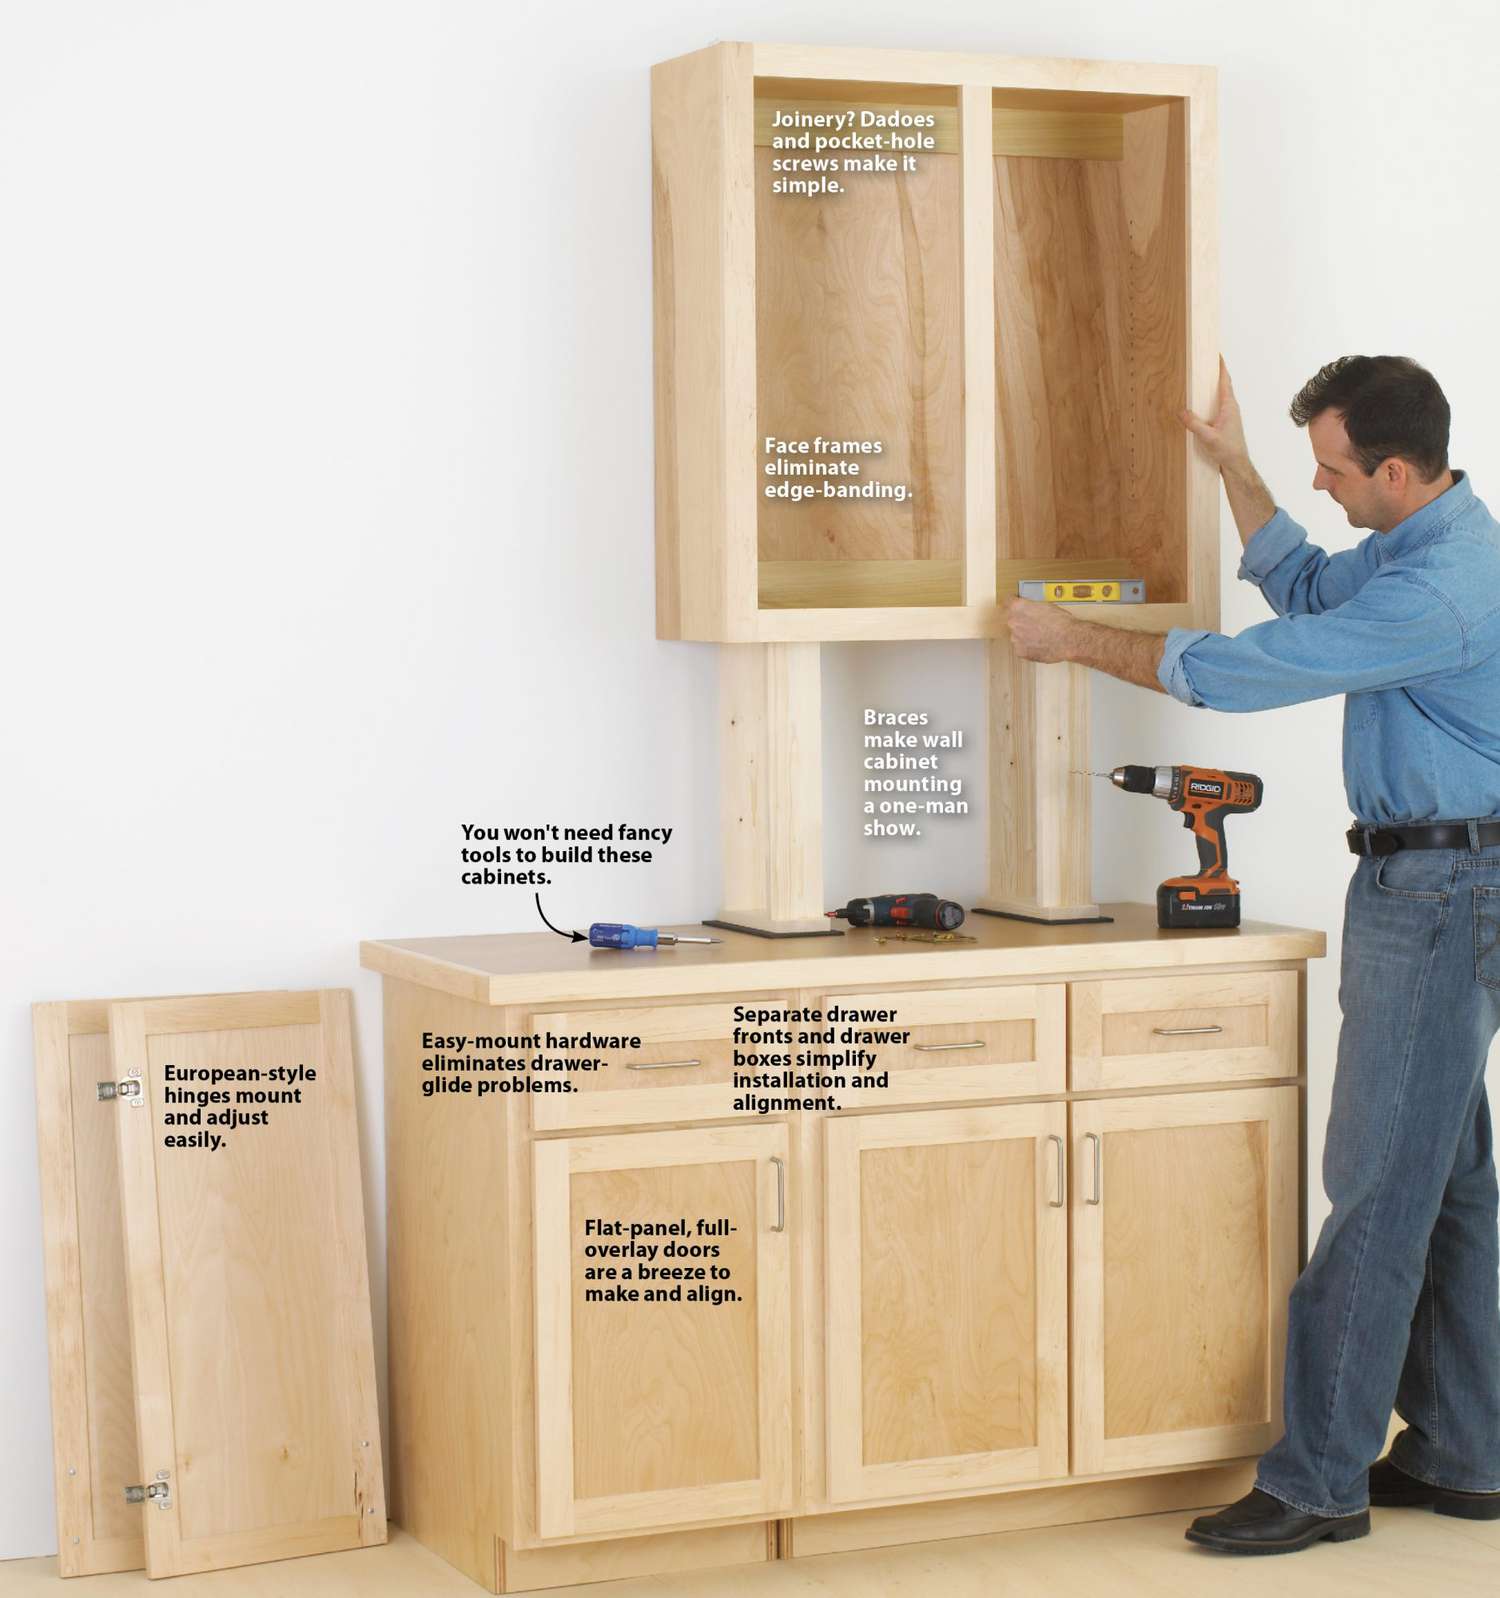 How to build a base for kitchen cabinets